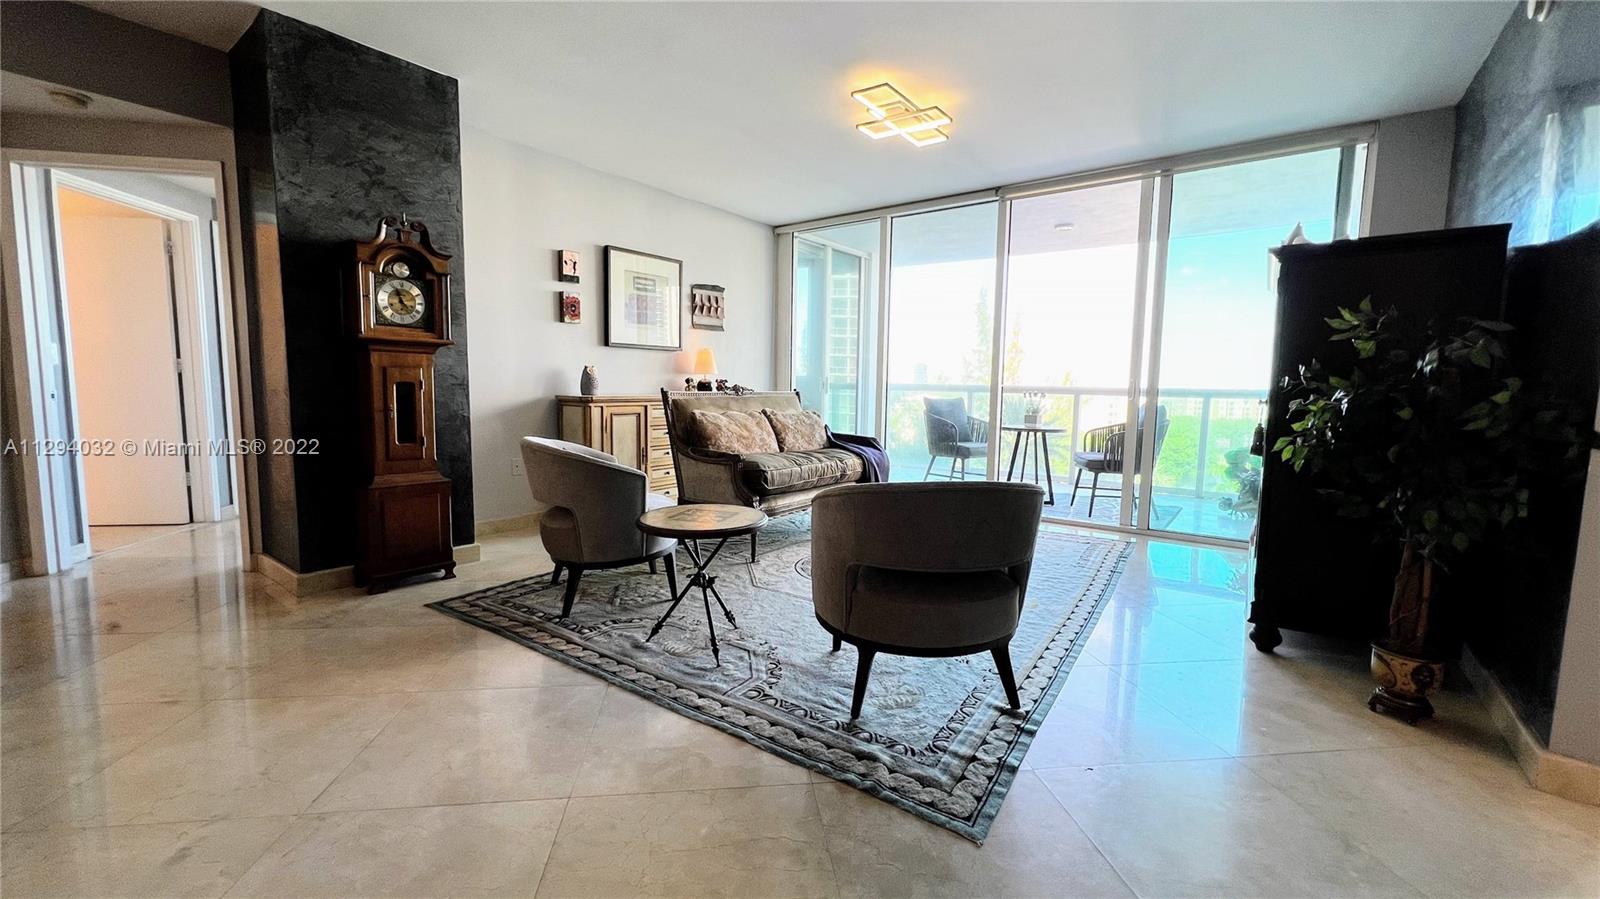 Photo 1 of The Parc At Turnberry Isl Apt 522 in Aventura - MLS A11294032